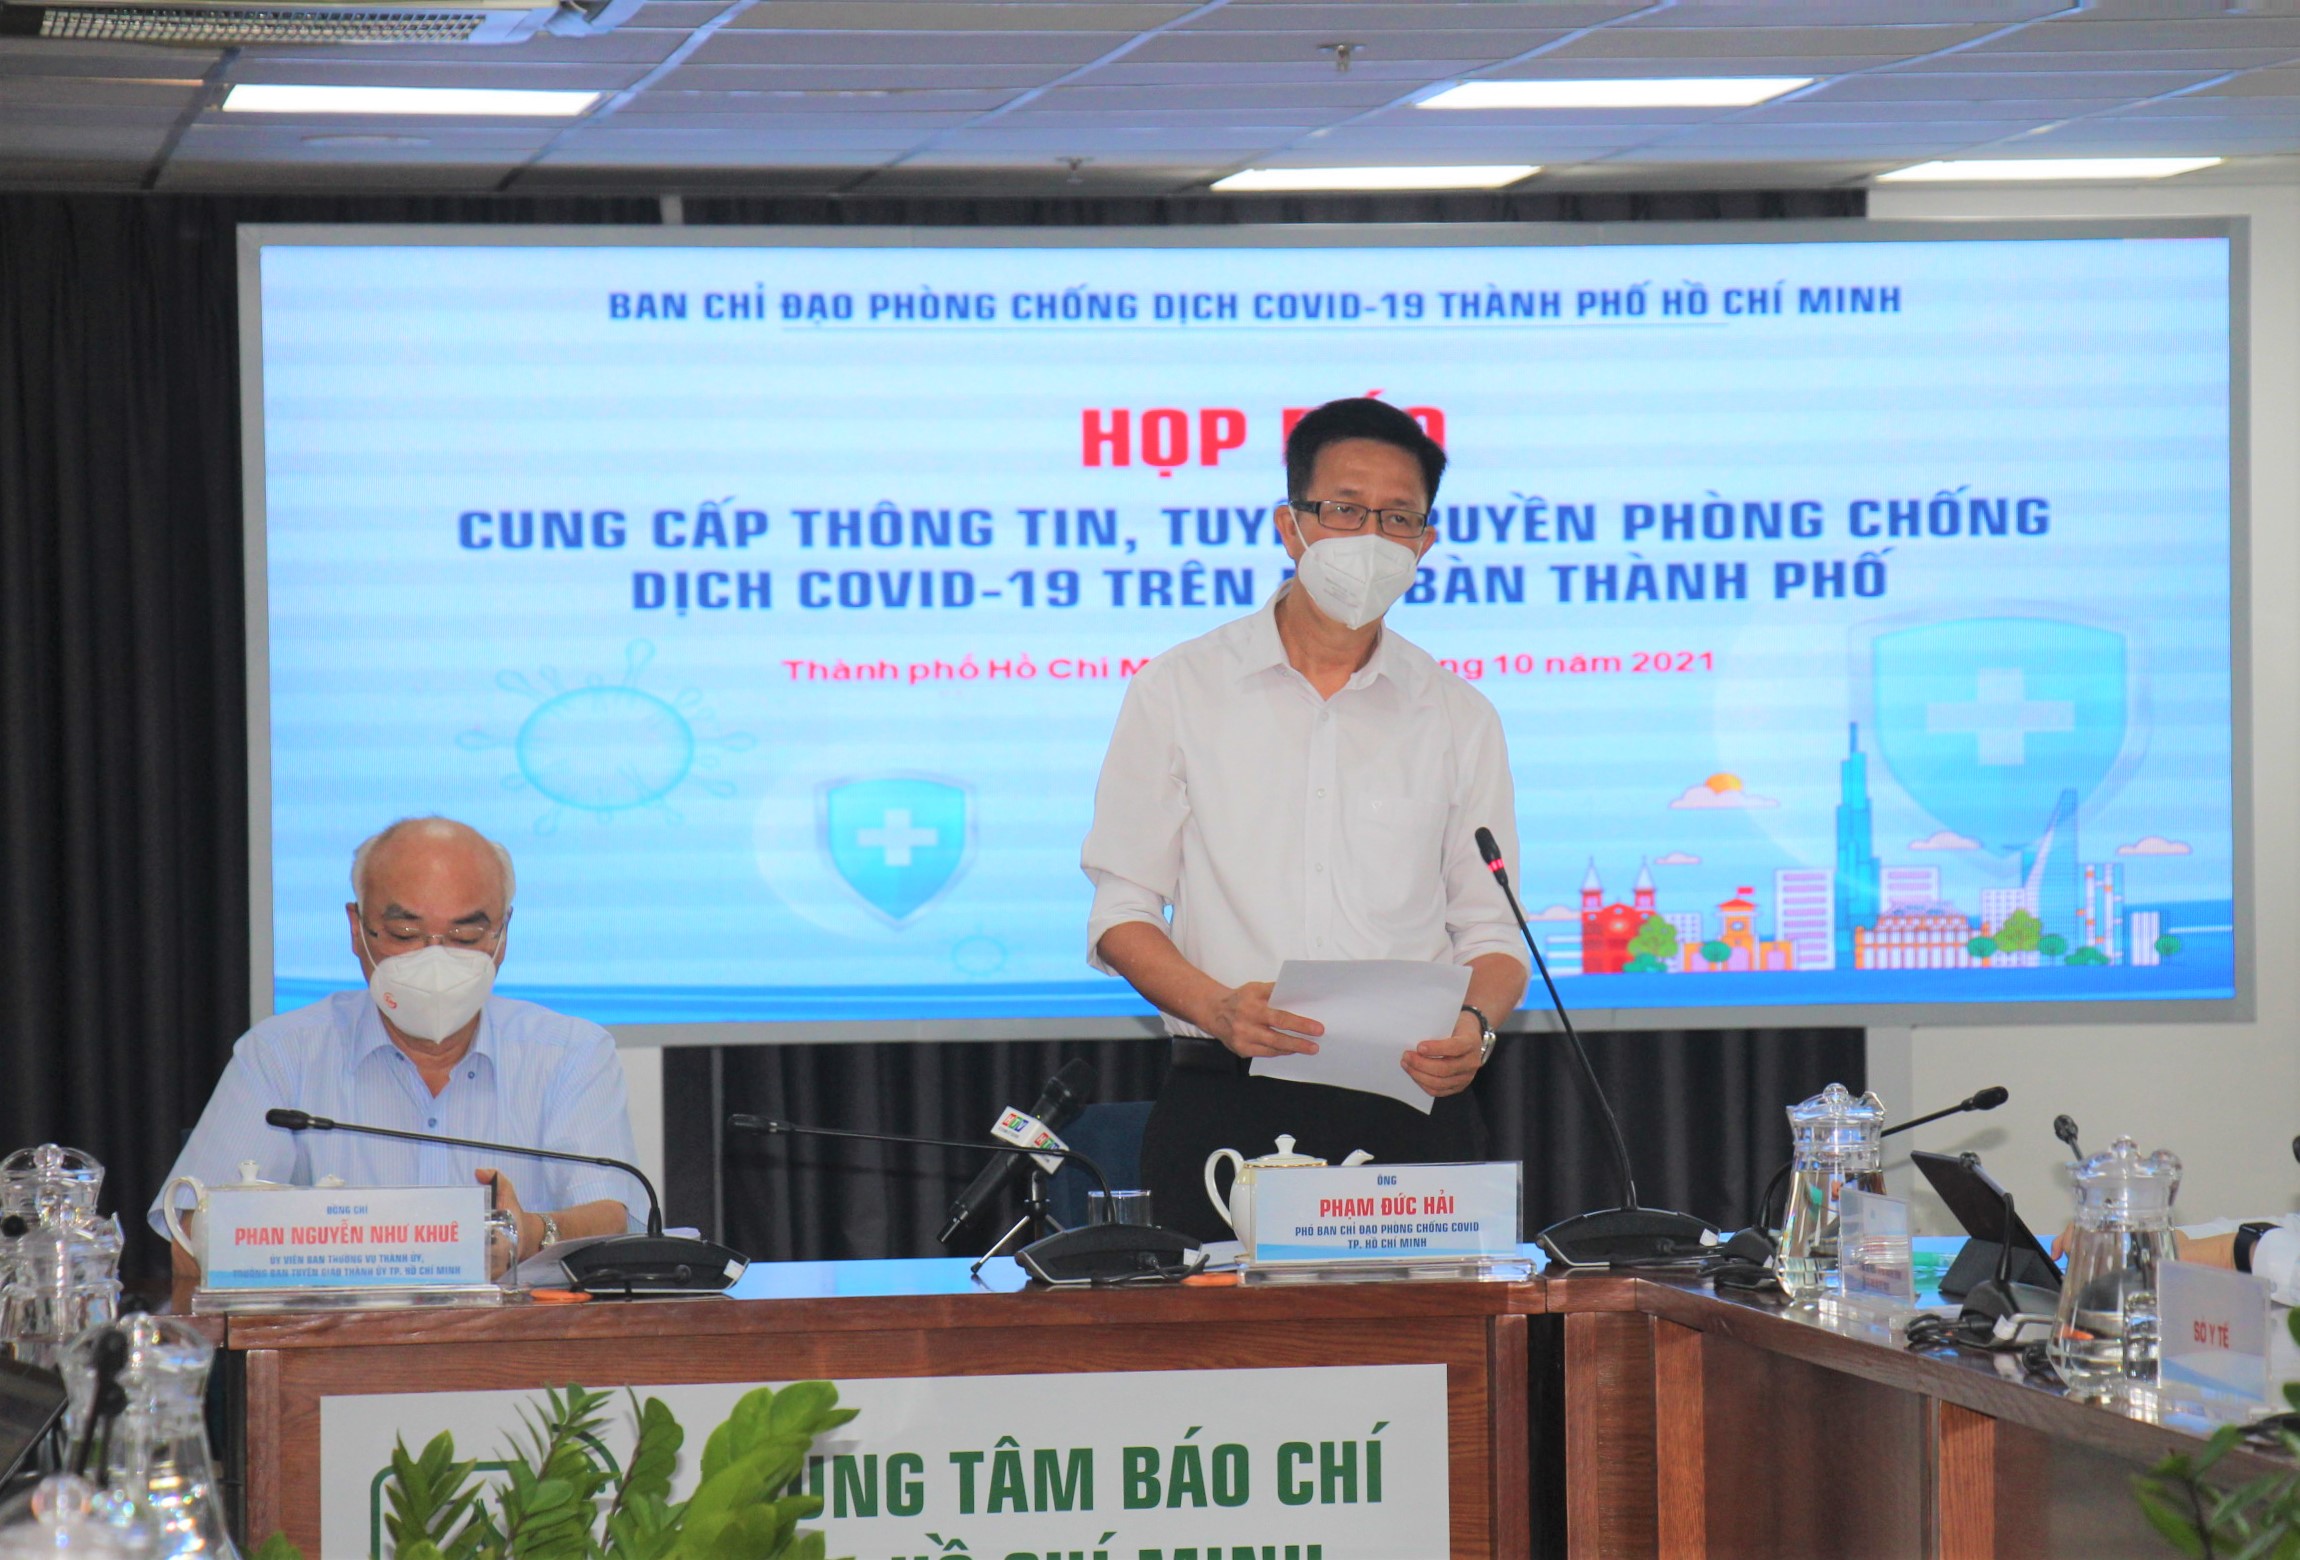 Over 9,000 businesses back on stream as Ho Chi Minh City eases social distancing